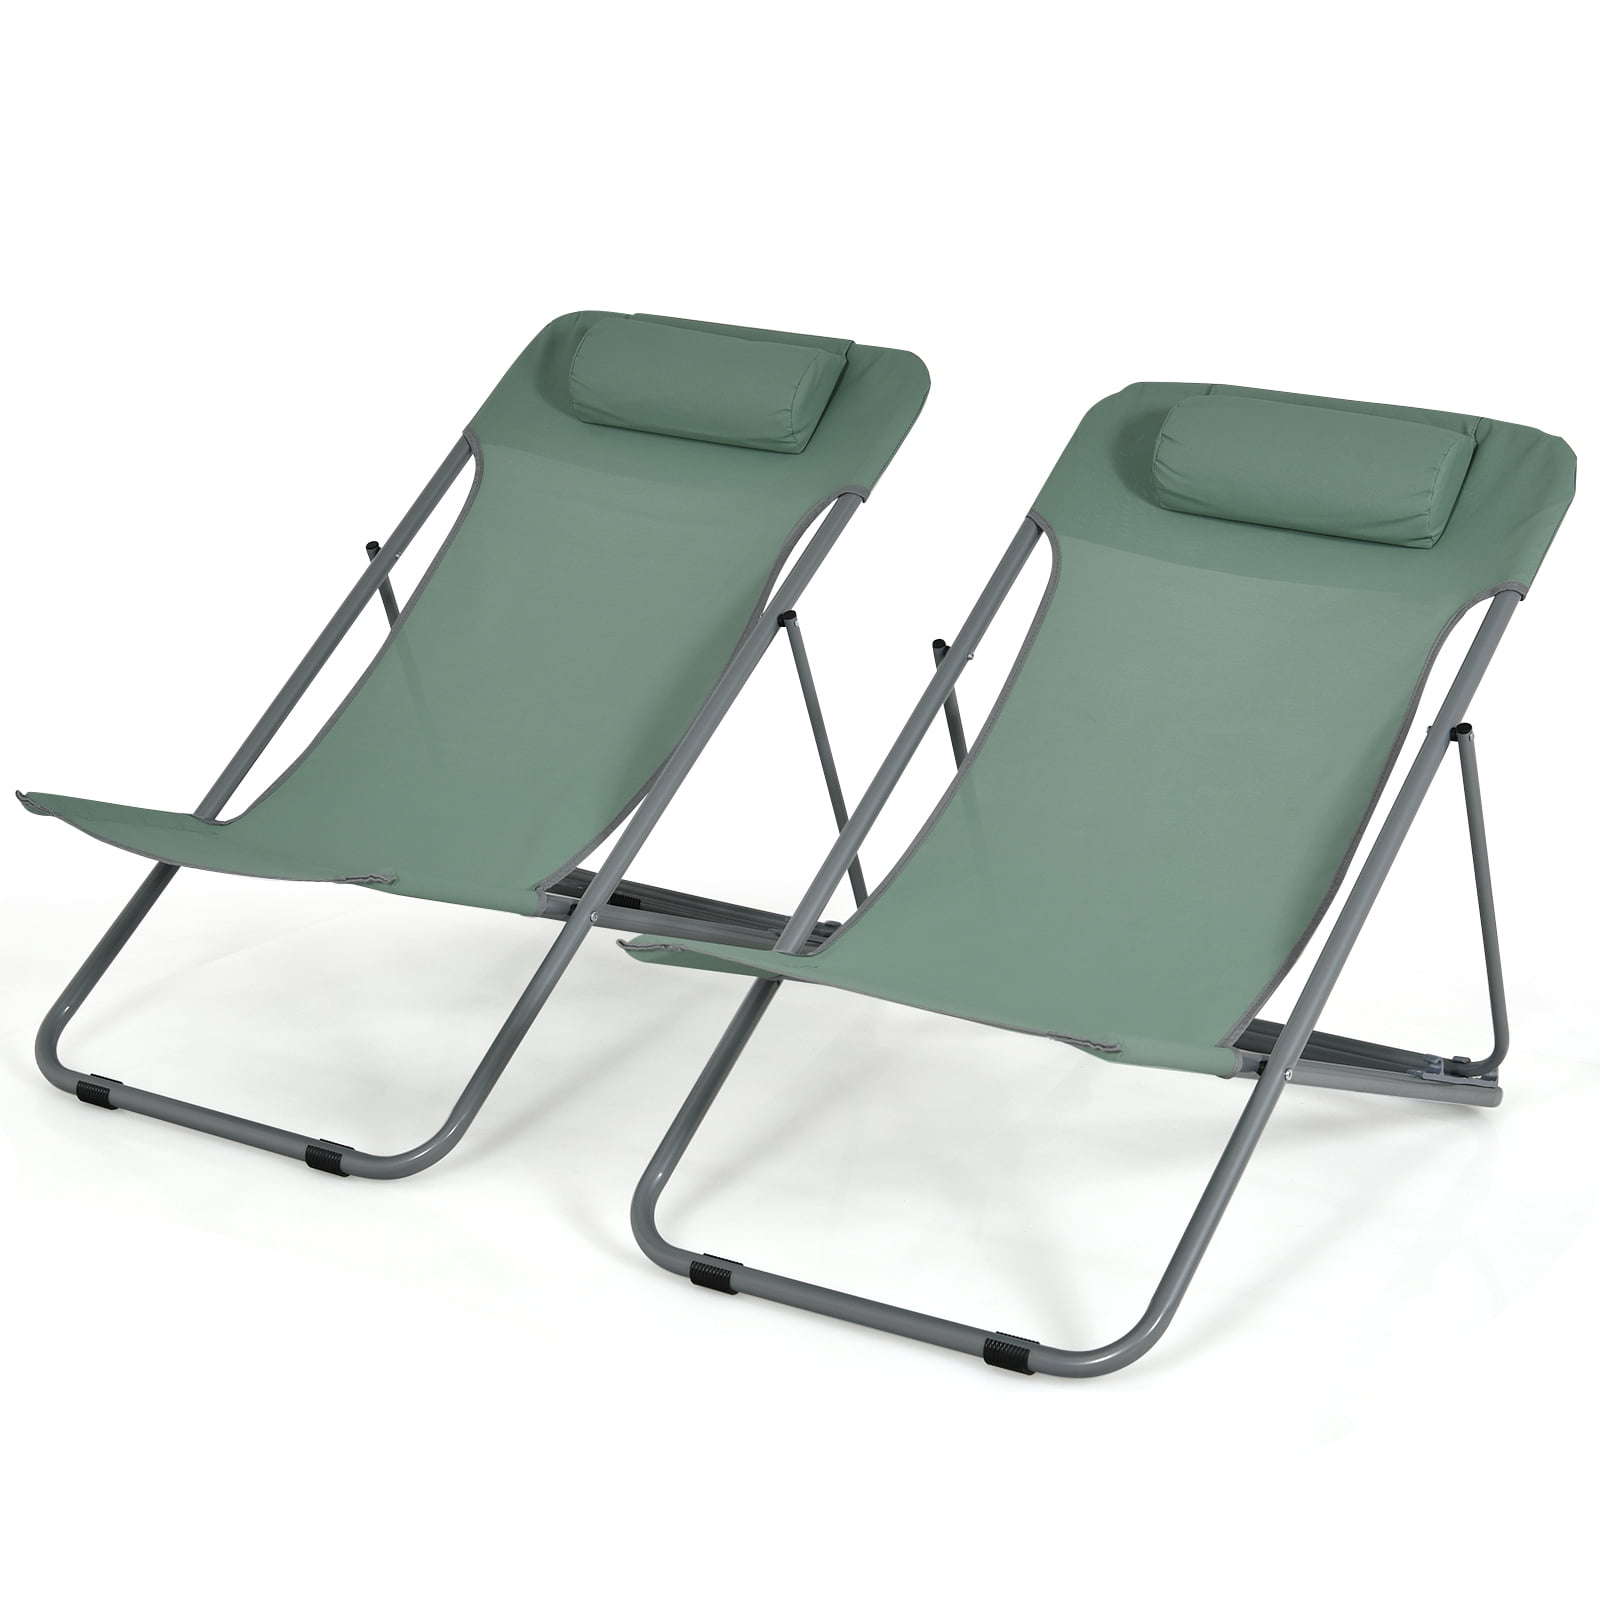 Ancheer 2 PC Oversized Adjustable Zero Gravity Chairs,Outdoor Reclining Beach Fo 